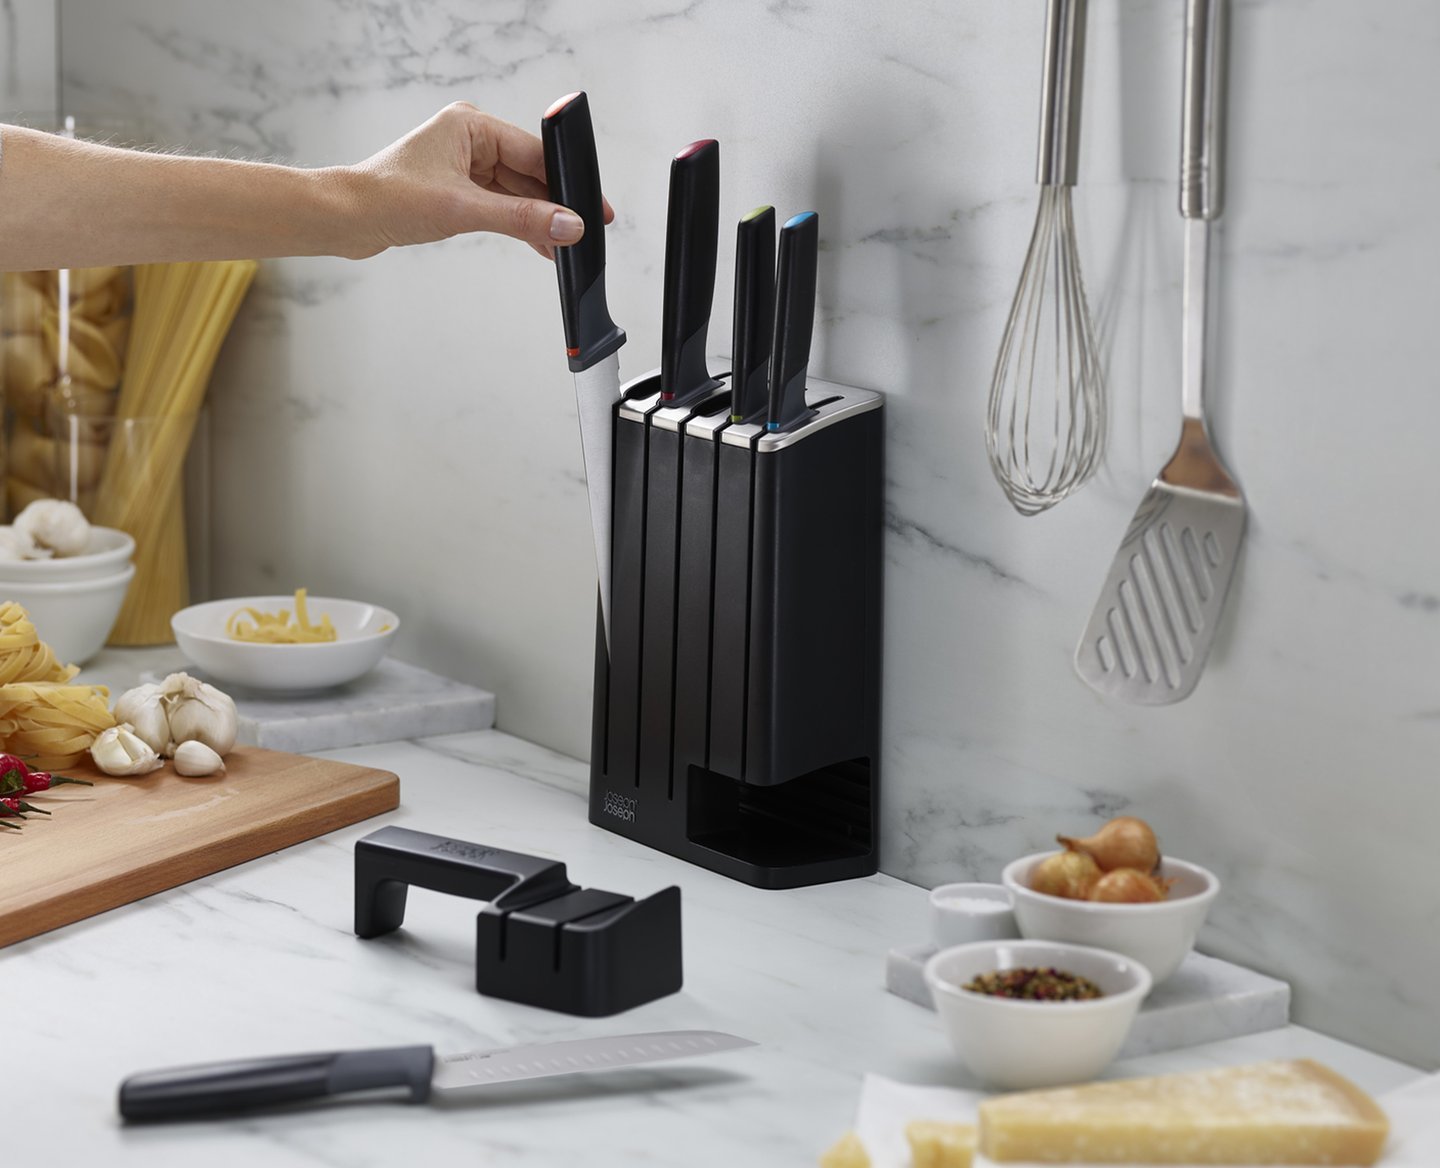 https://3fa-media.com/joseph-joseph/joseph-joseph-elevate-slimblock-knife-block-with-five-knives-with-sharpener__107933_0bbdcb8-s2500x2500.jpg